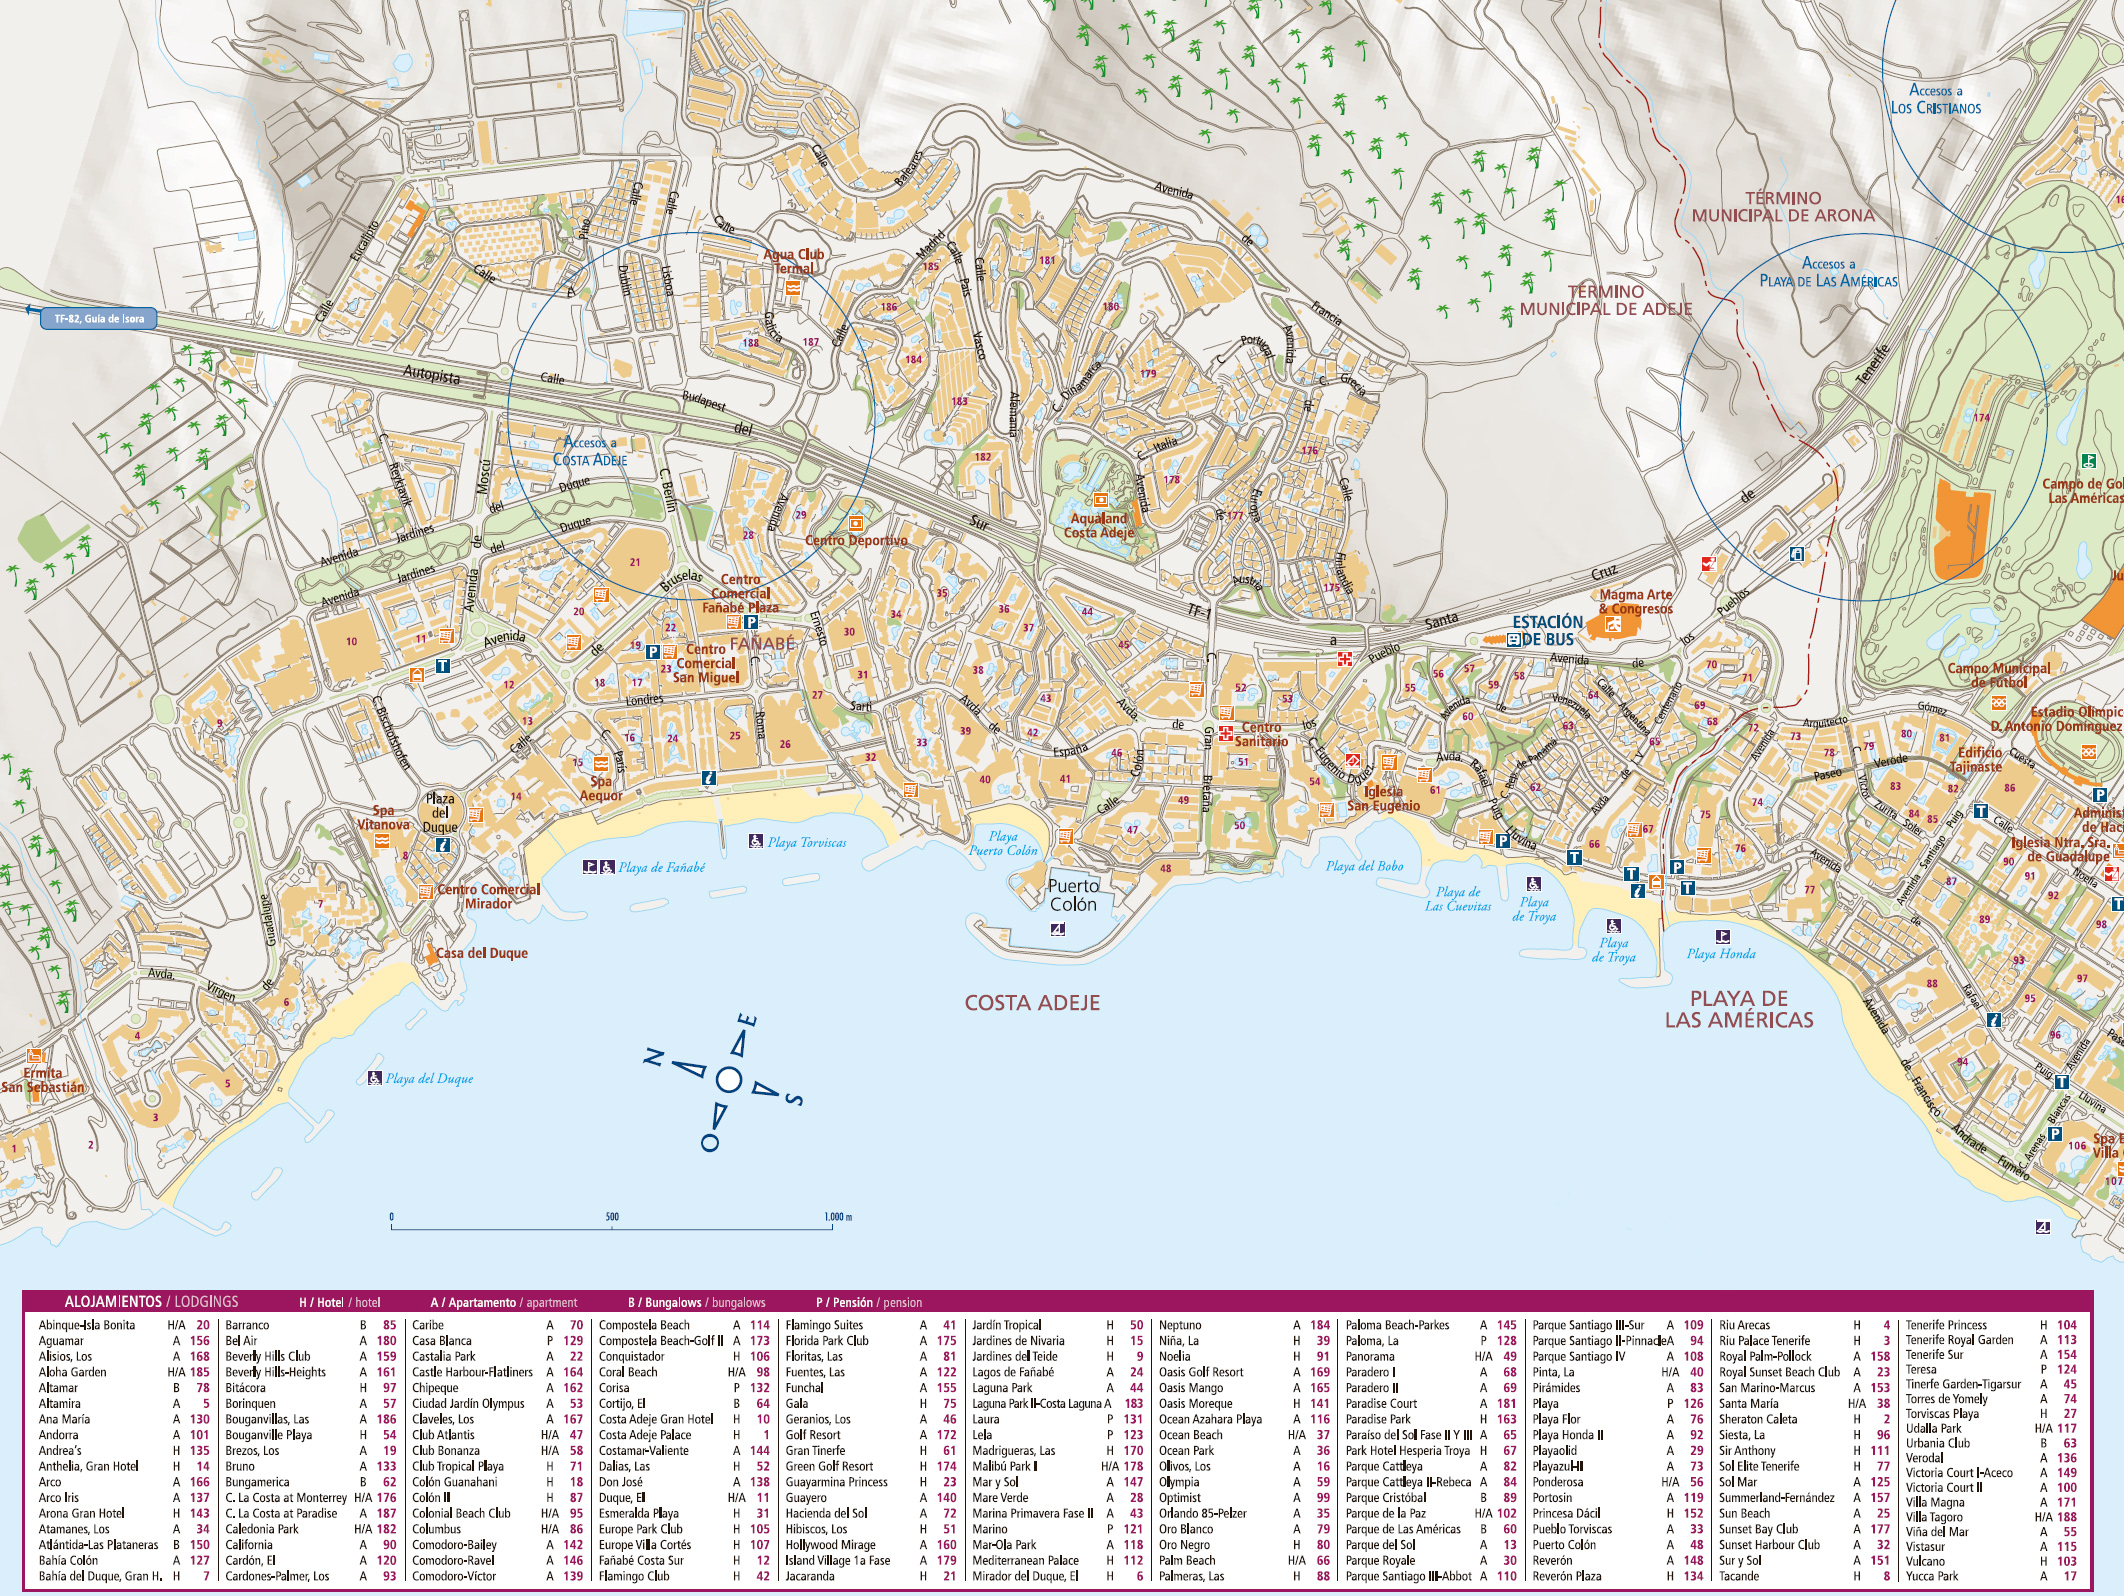 Interactive map of the district of Costa Adeje in Tenerife